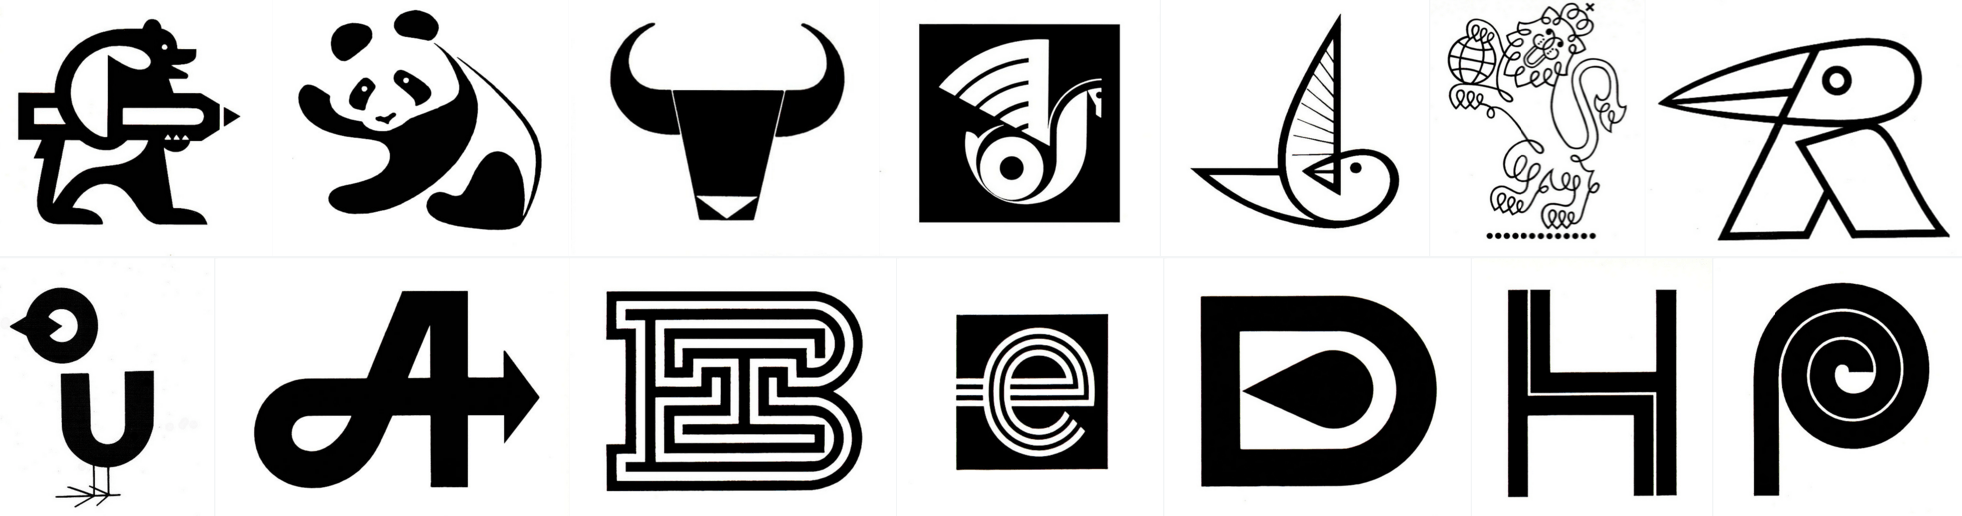 50s Logo - Monochrome logos from the 50s and 70s - Hotfoot Design